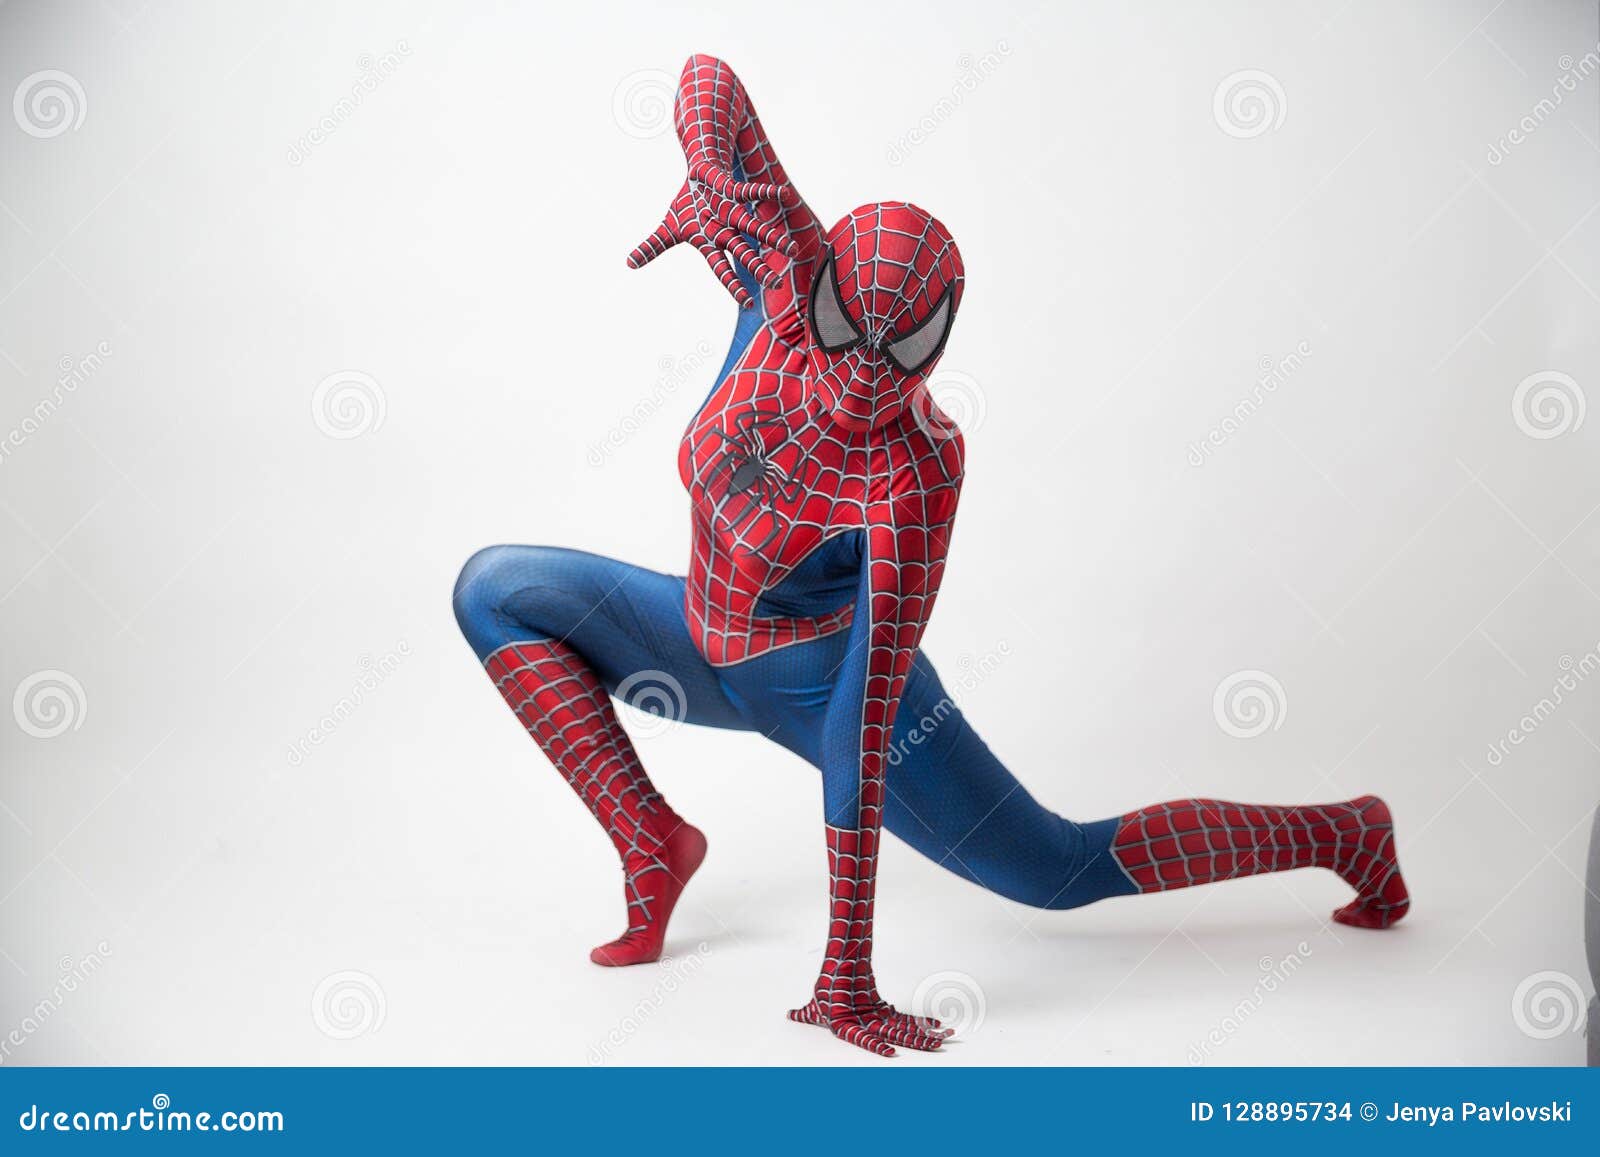 Amazon.com: メディコム・トイ(MEDICOM TOY) MAFEX No.185 Spider-Man Spider-Man  (Classic Costume Ver.) Total Height Approx. 6.1 inches (155 mm), Non-Scale,  Pre-Painted Action Figure : Toys & Games